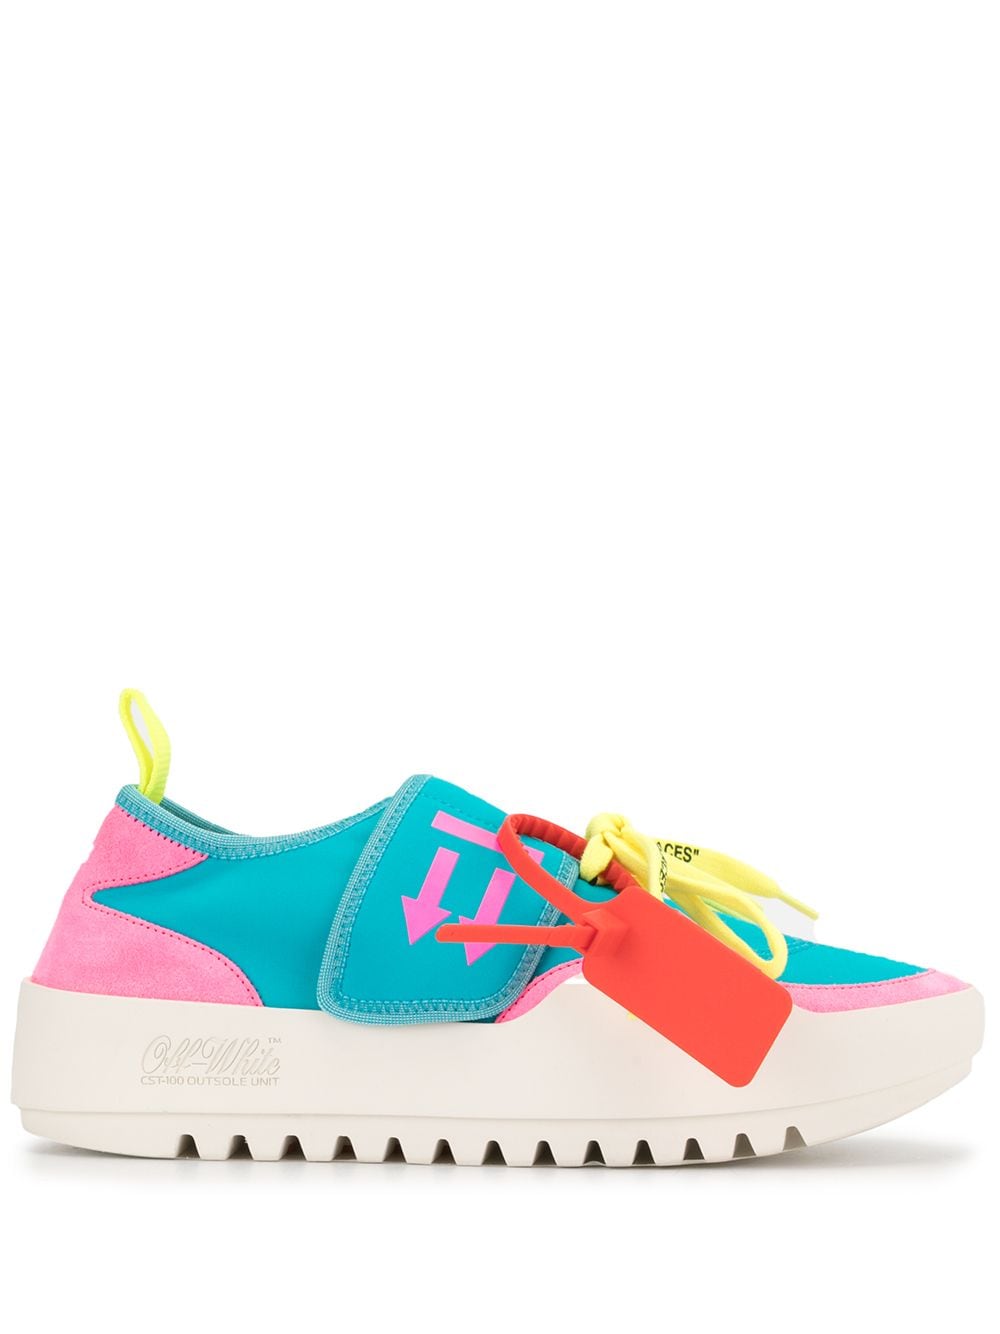 OFF-WHITE MOTO LOW-TOP SNEAKERS